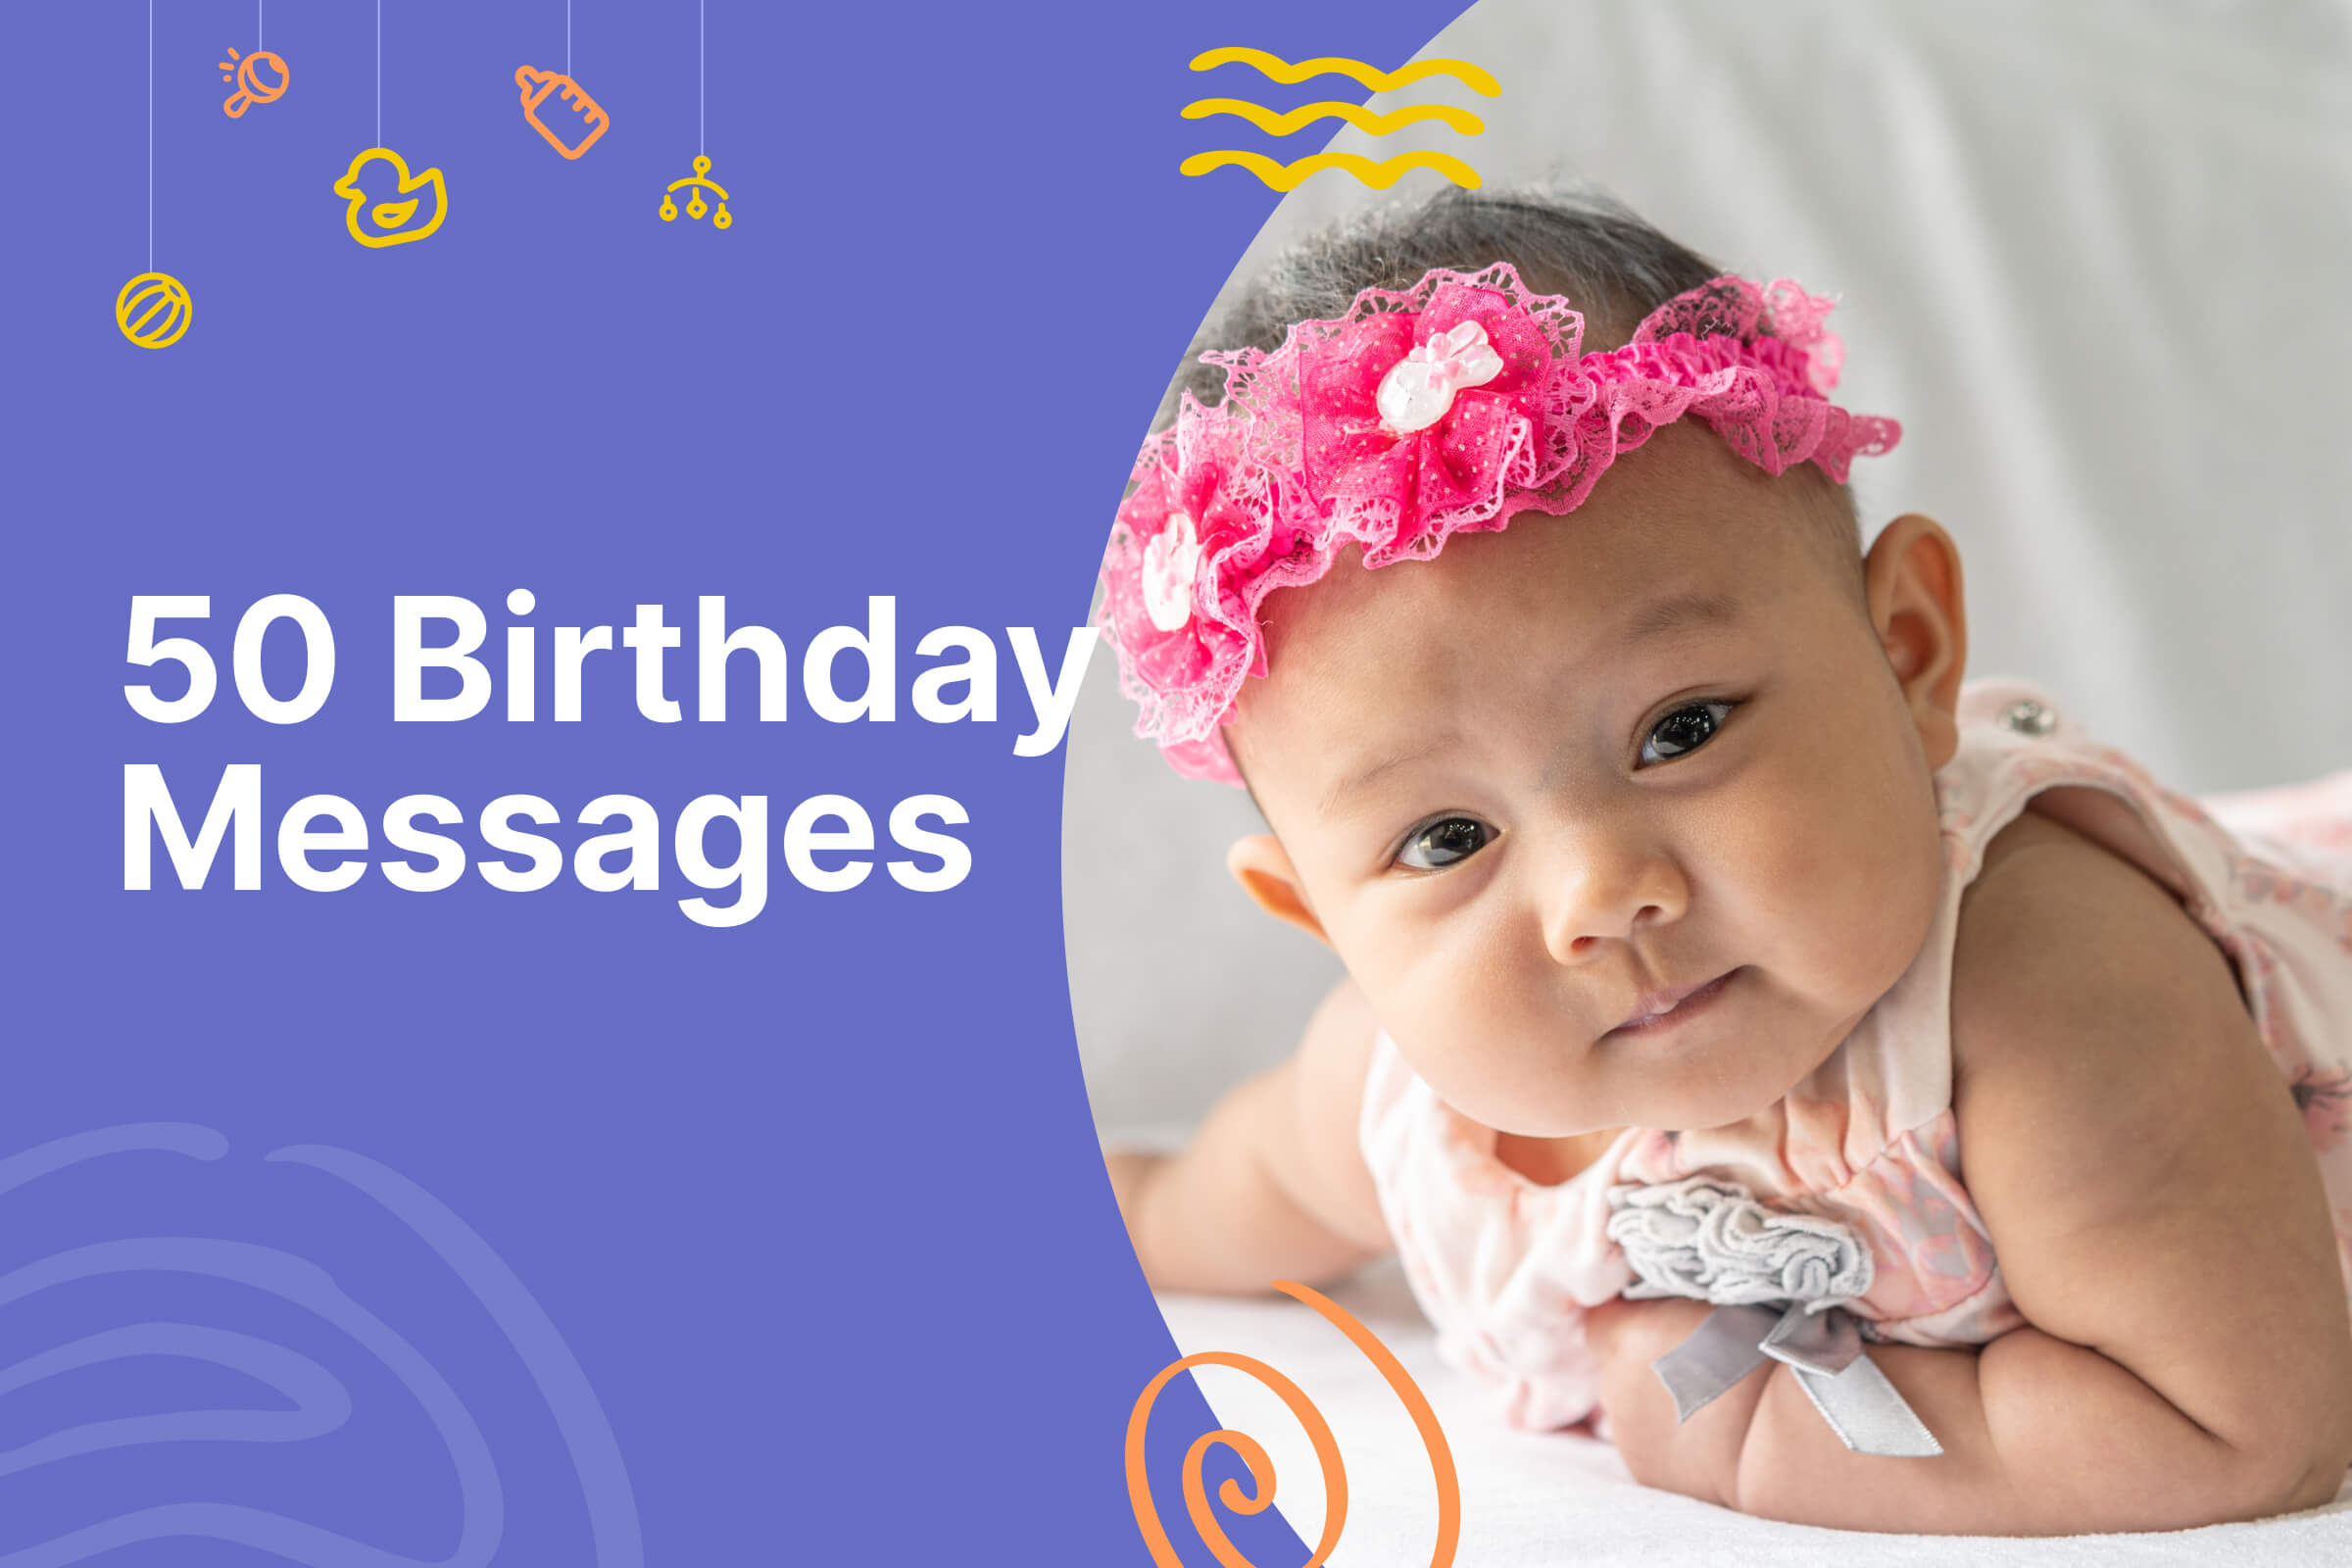 Birthday Messages for a One-Month-Old Baby